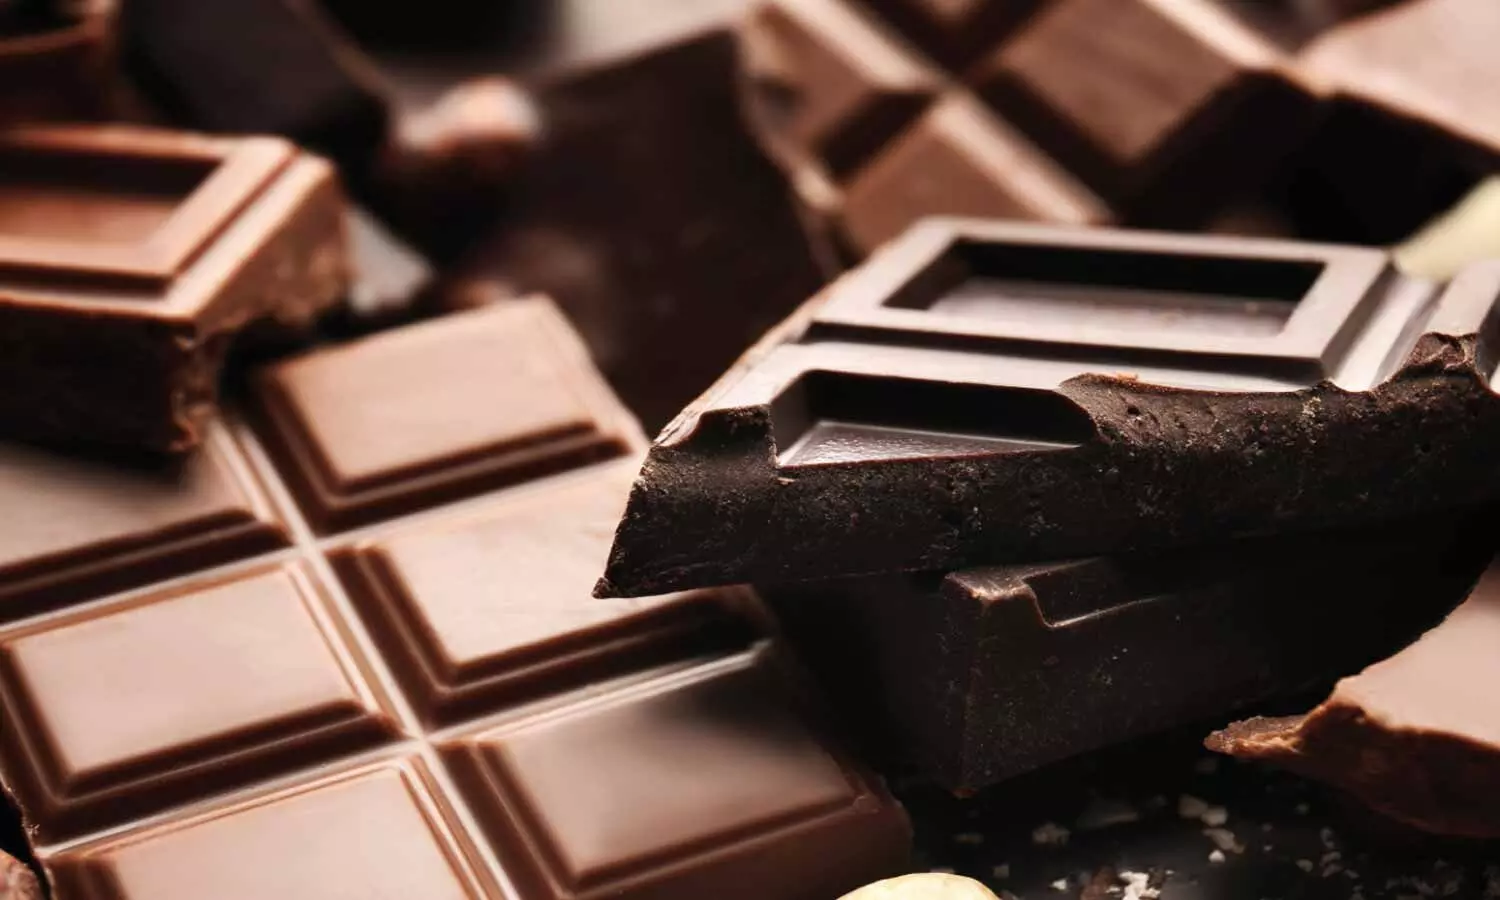 High intake of chocolate in morning helps reduce blood sugar and weight: Study